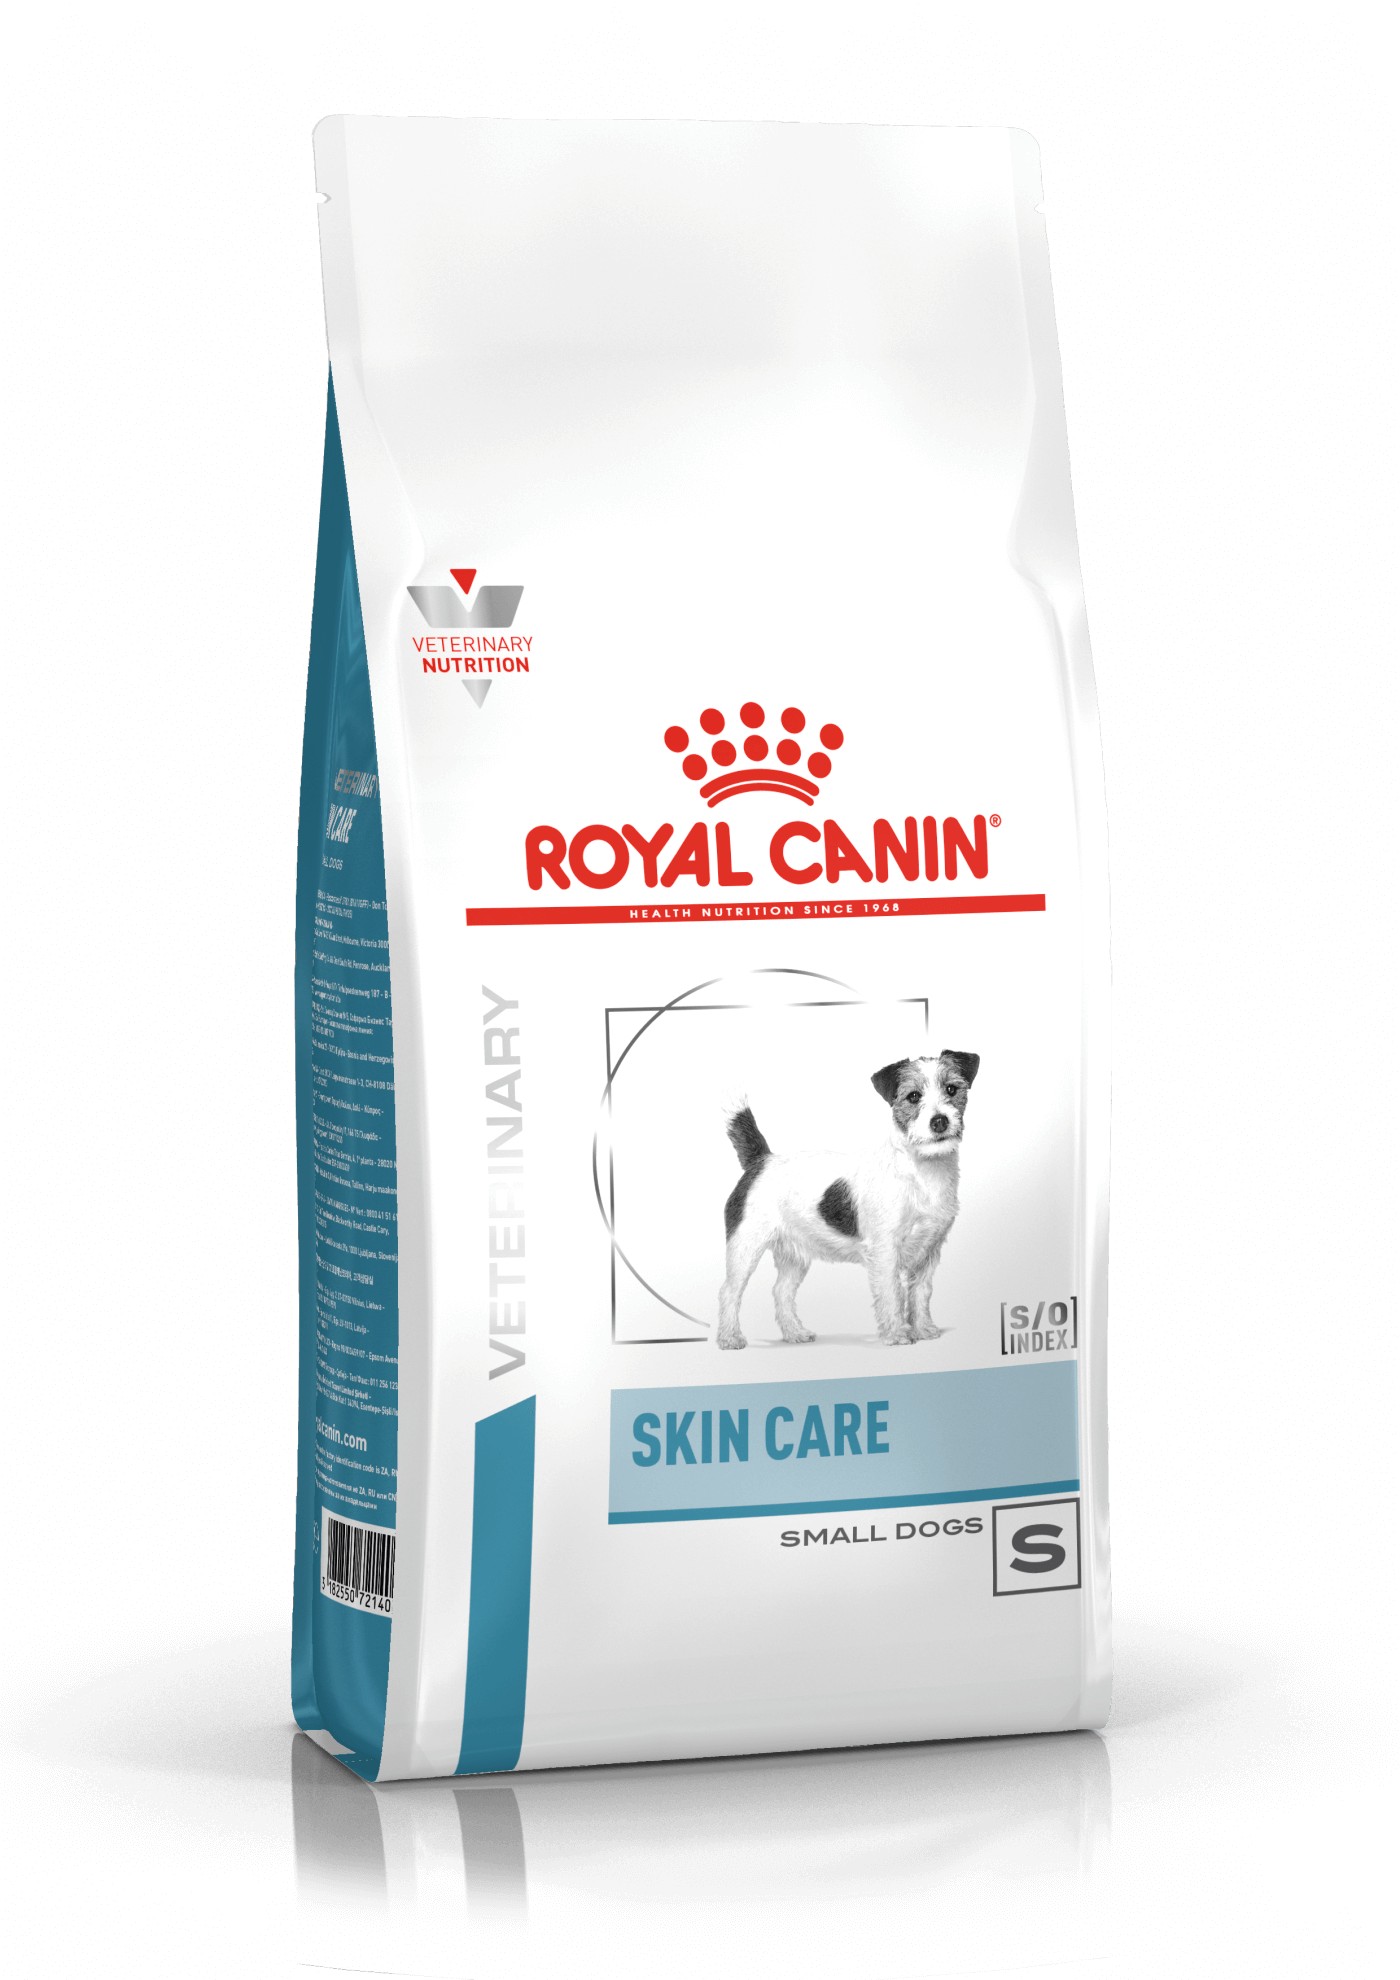 Royal Canin Veterinary Skin Care Small Dogs Hundefutter